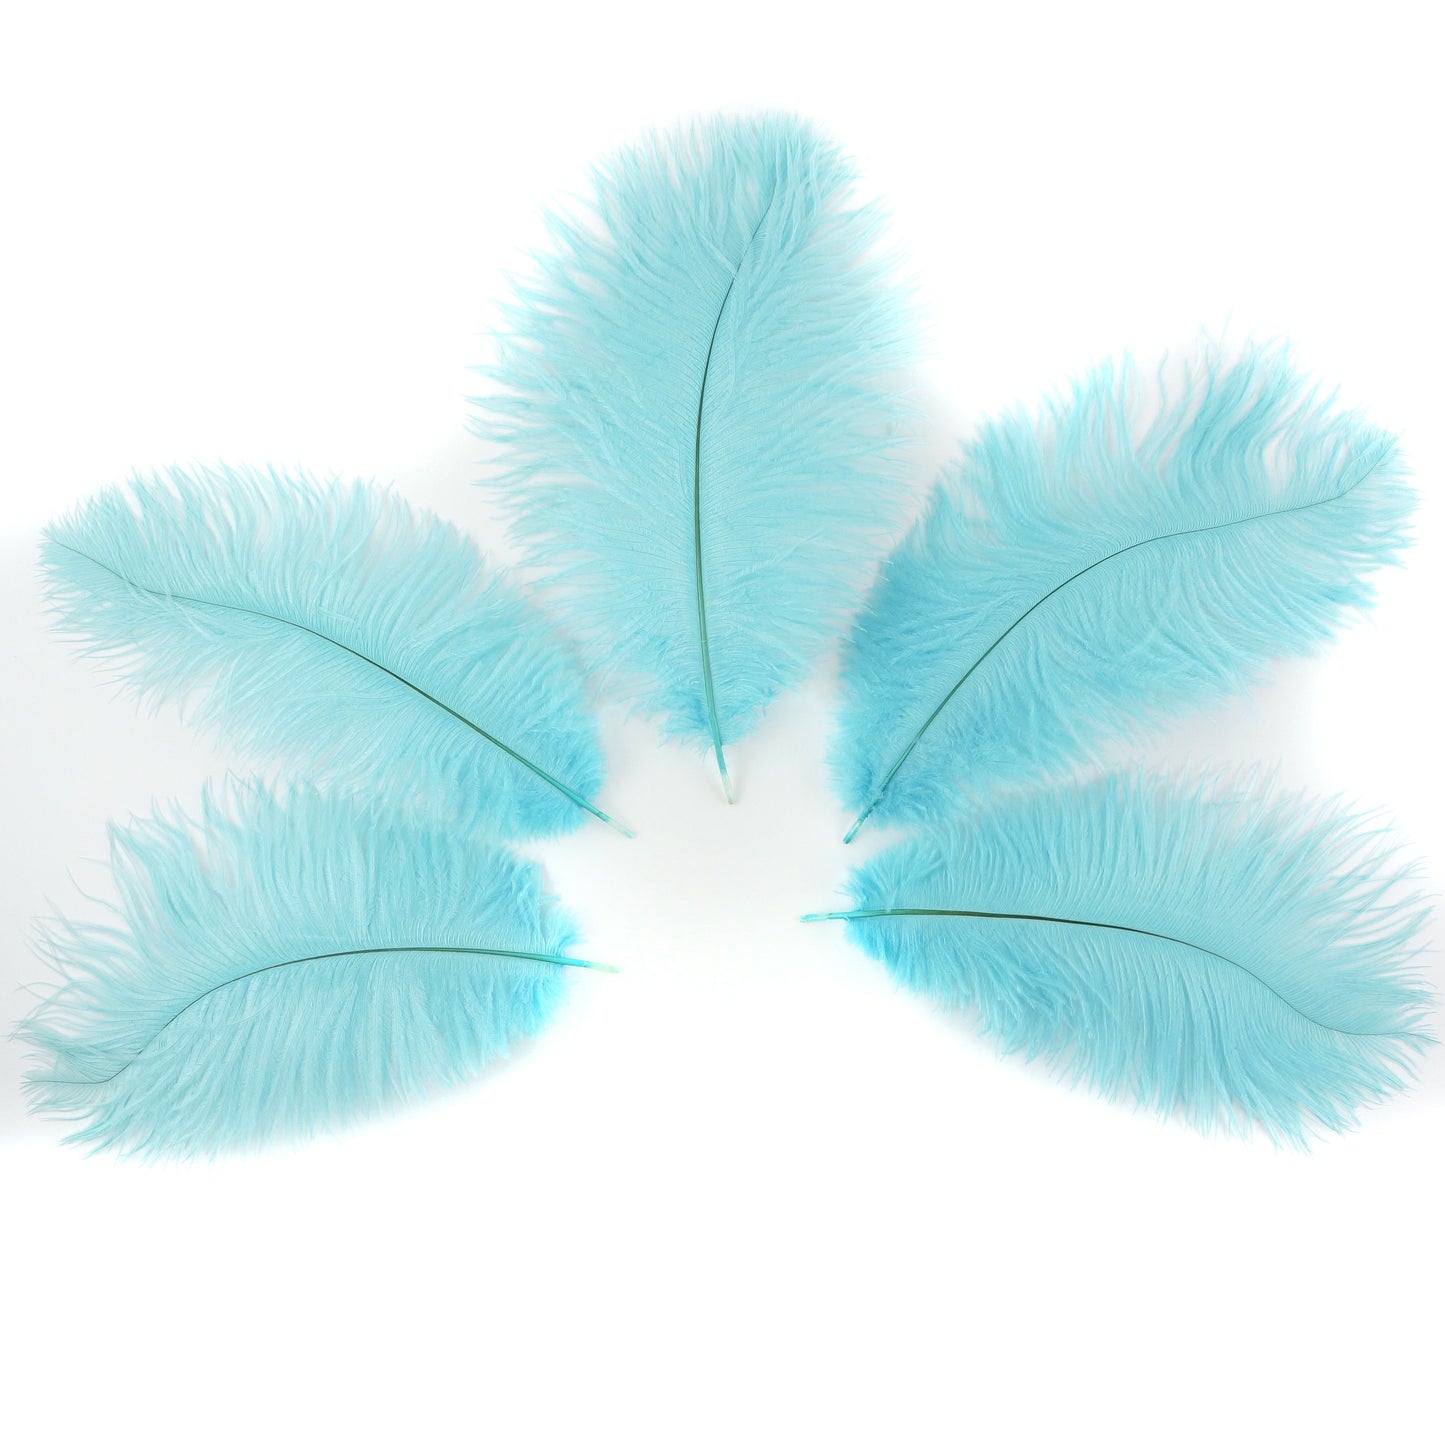 Ostrich Feathers 9-12" Drabs - Light Turquoise